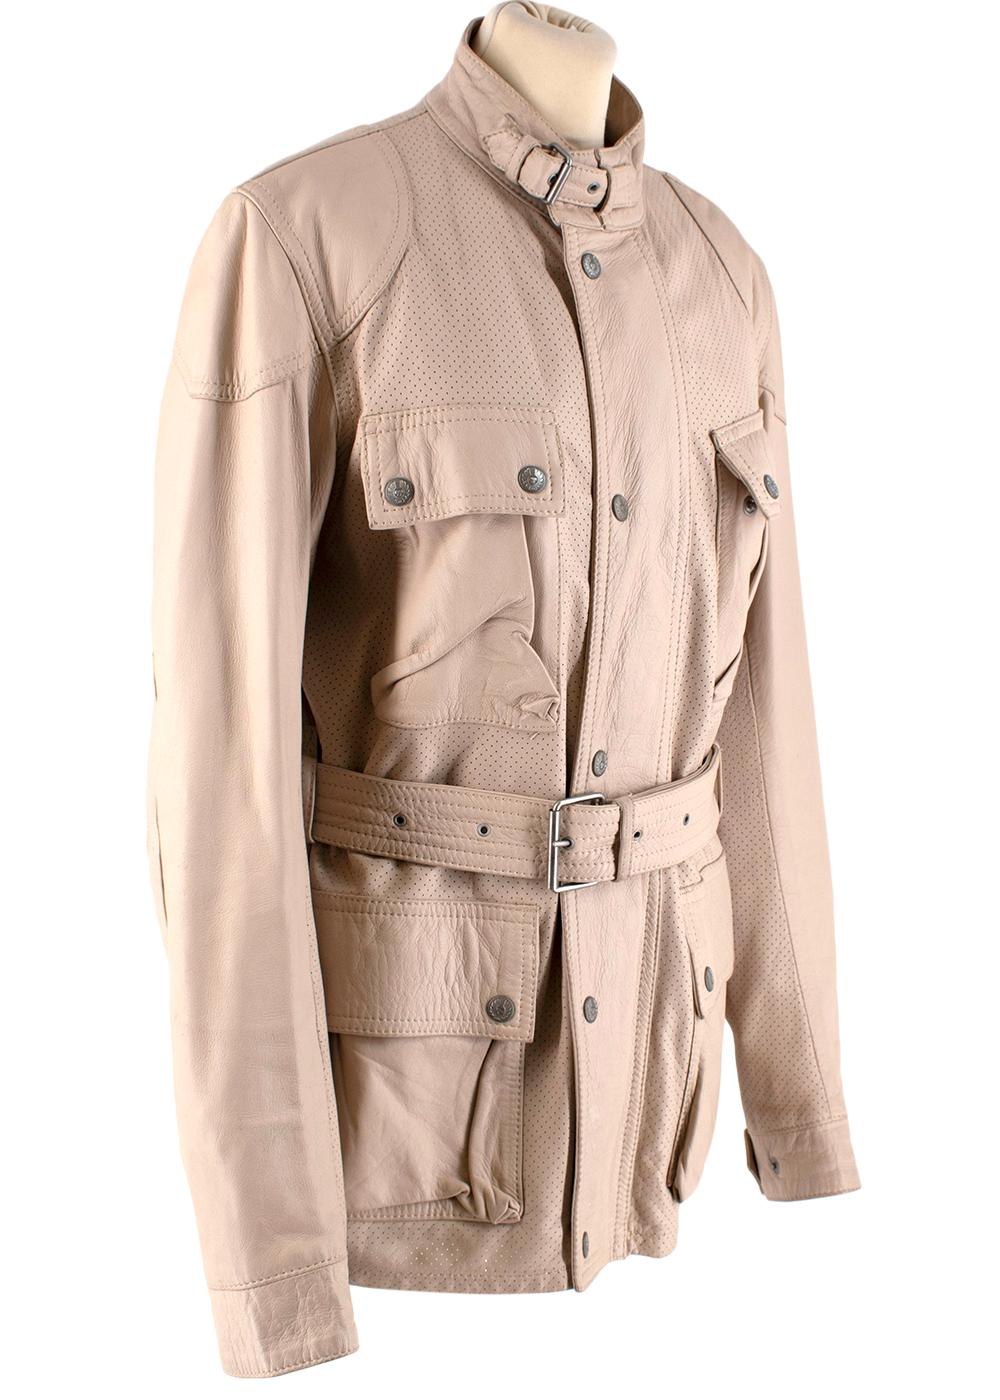 Belstaff Beige Leather Trialmaster Belted Jacket
-Soft, luxurious leather material
-Gorgeous beige hue
-Silver hardware
-Hidden zipper enclosure down front with buttons
-Four bellows pockets with dual press stud closure
-Signature logo plague on